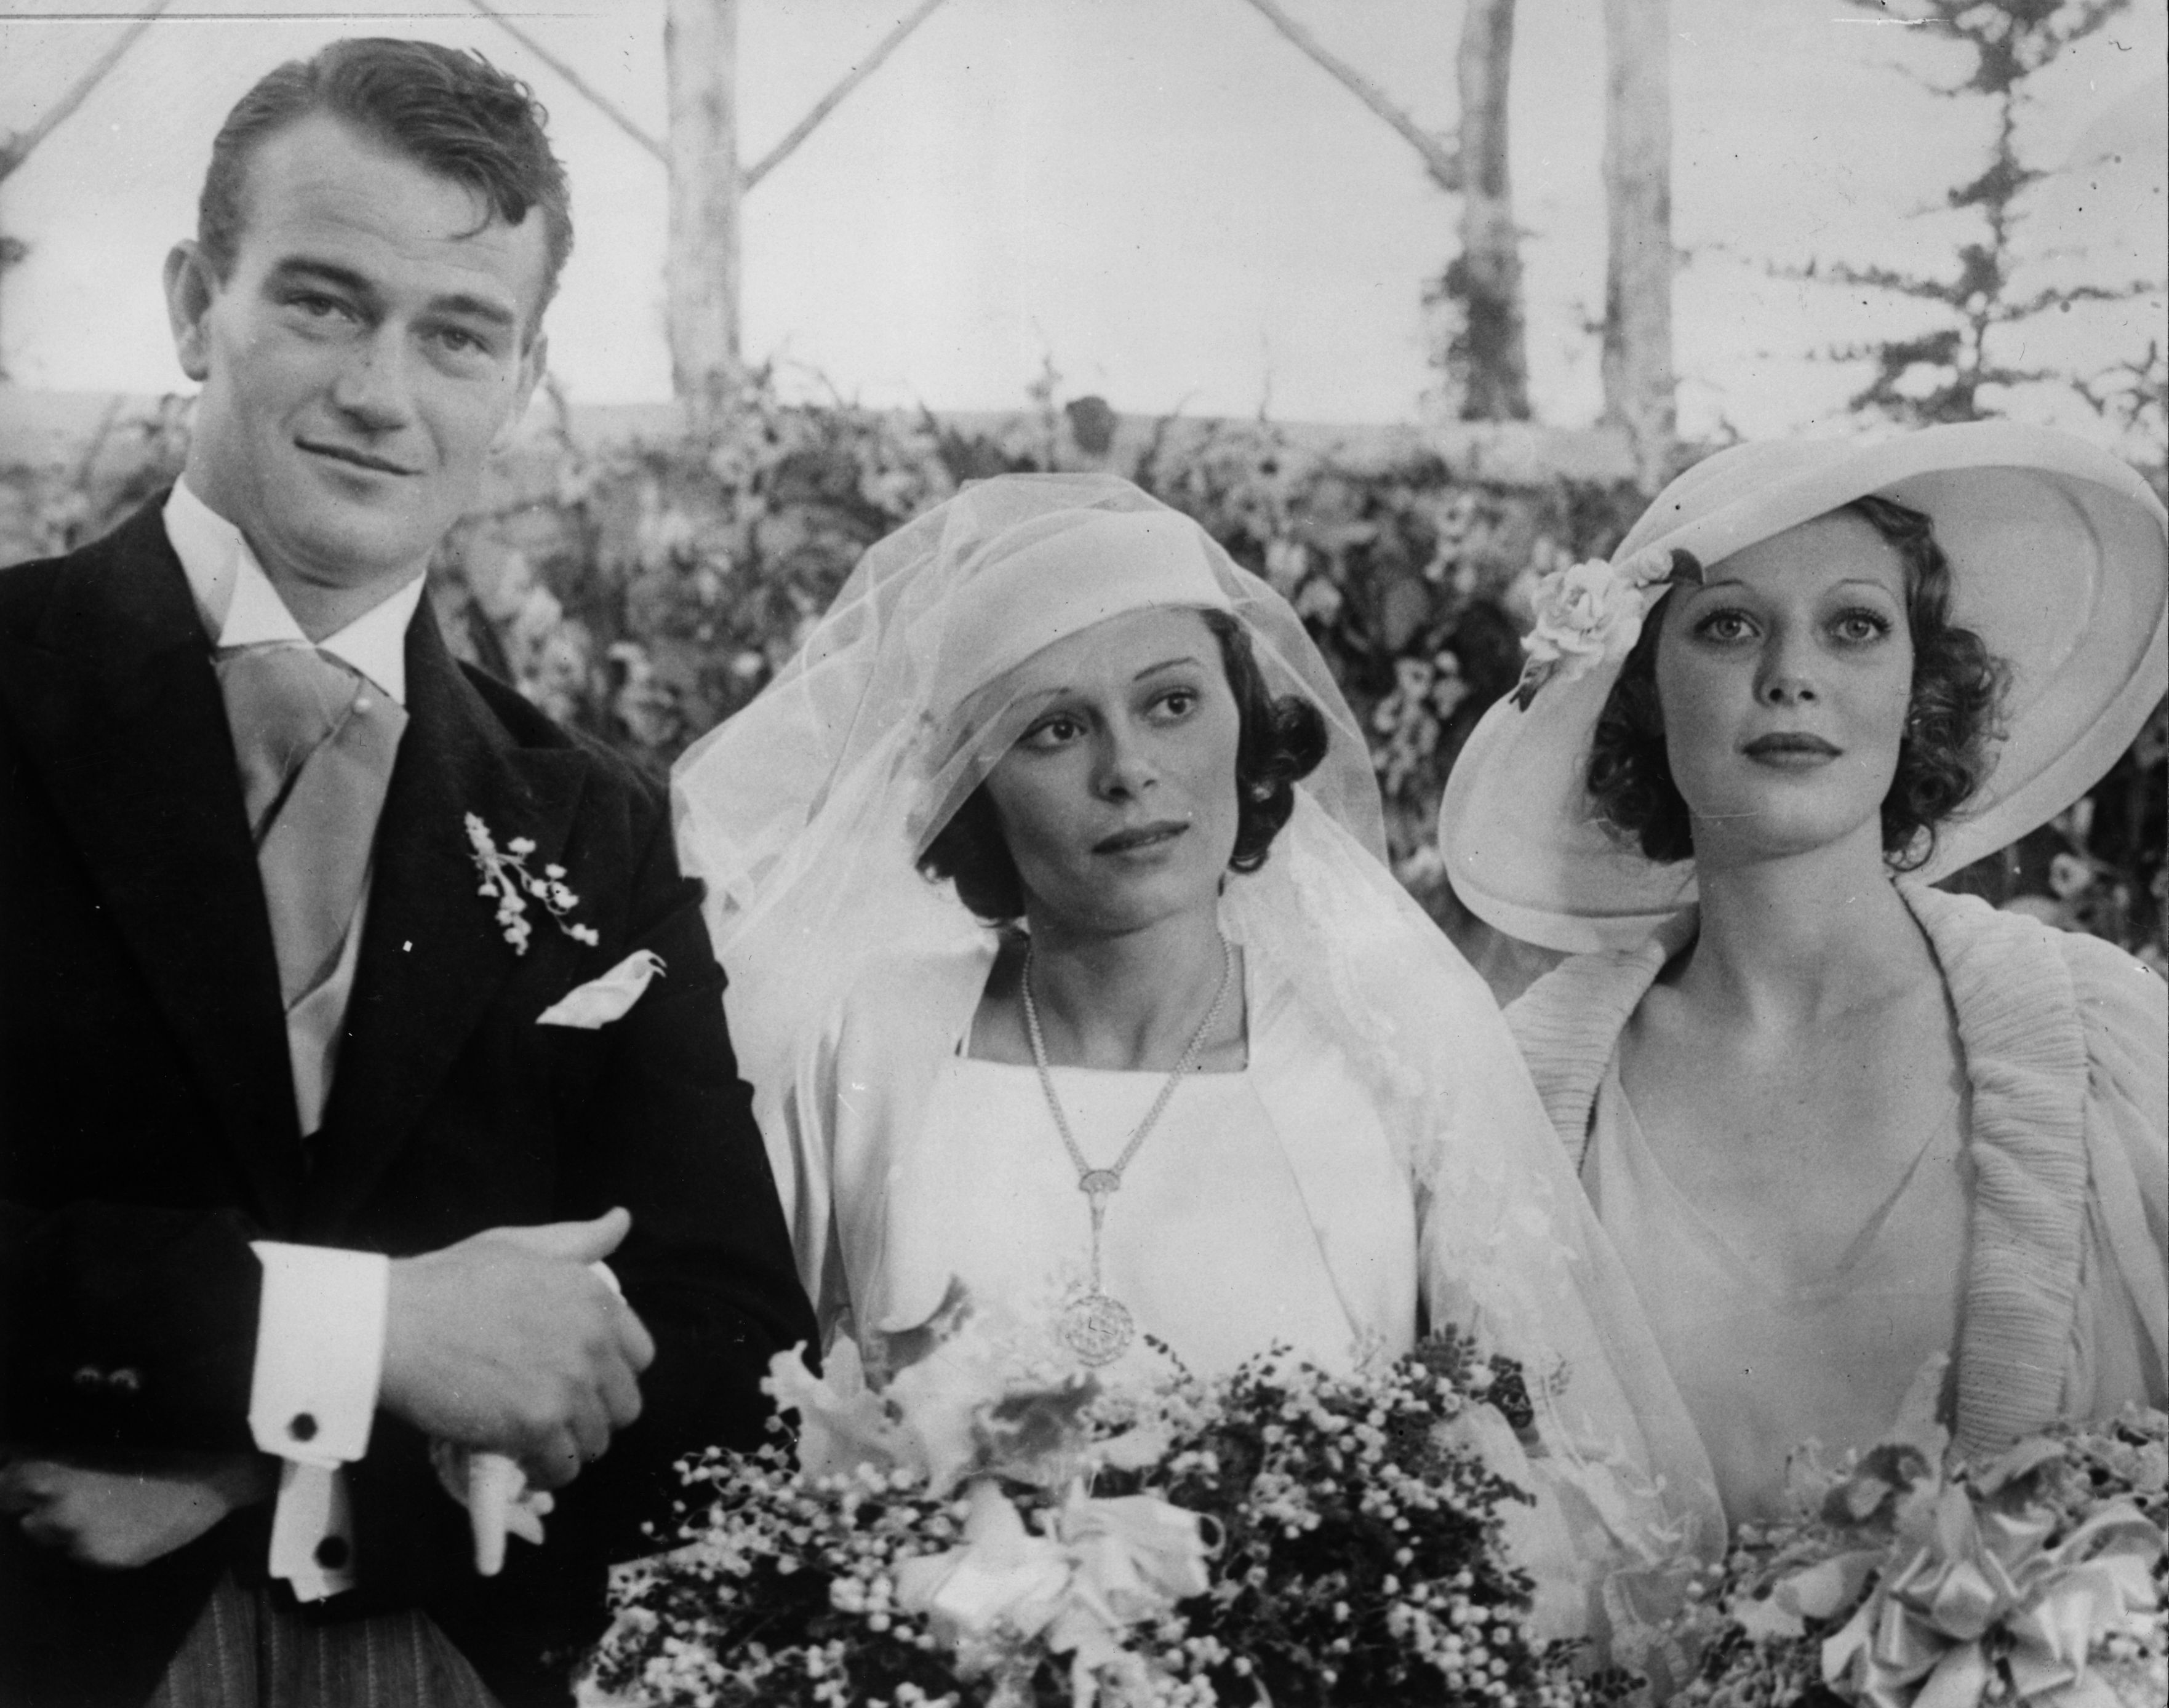 Film actor John Wayne on his wedding day with his wife Josephine Saenz and Loretta Young (1913 - 2000) | Source: Getty Images